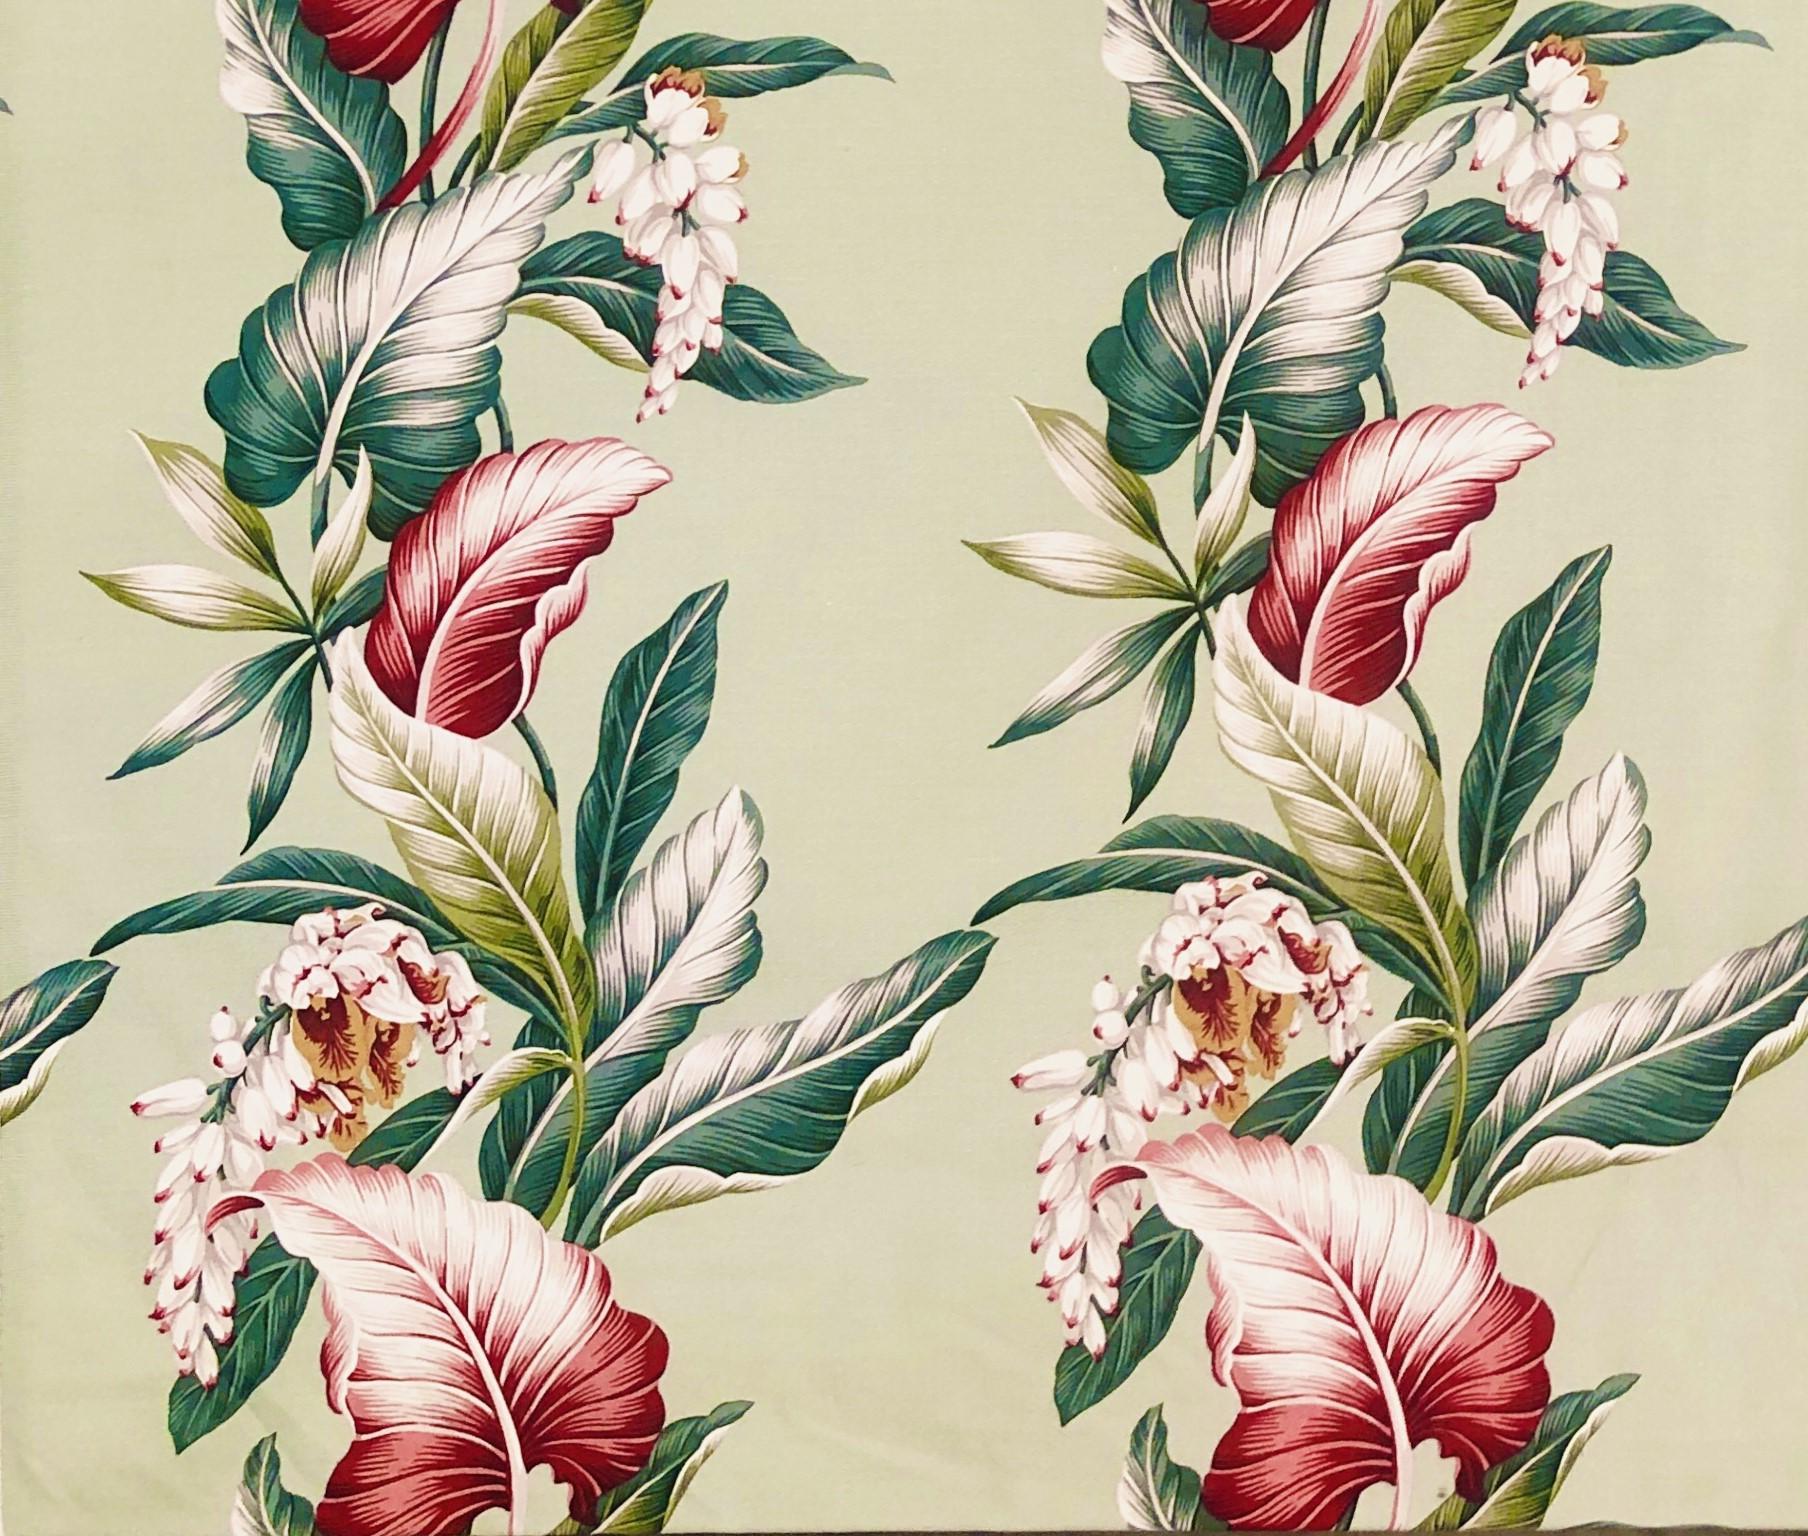 This beautiful fabric is 100% cotton, textured, and printed woven fabric. This fabric is mint green featuring a beautiful pink, ruby, and emerald flower design and tropical leaf pattern by Trendtex Fabrics #HTPG-1017 as seen in the photos

This